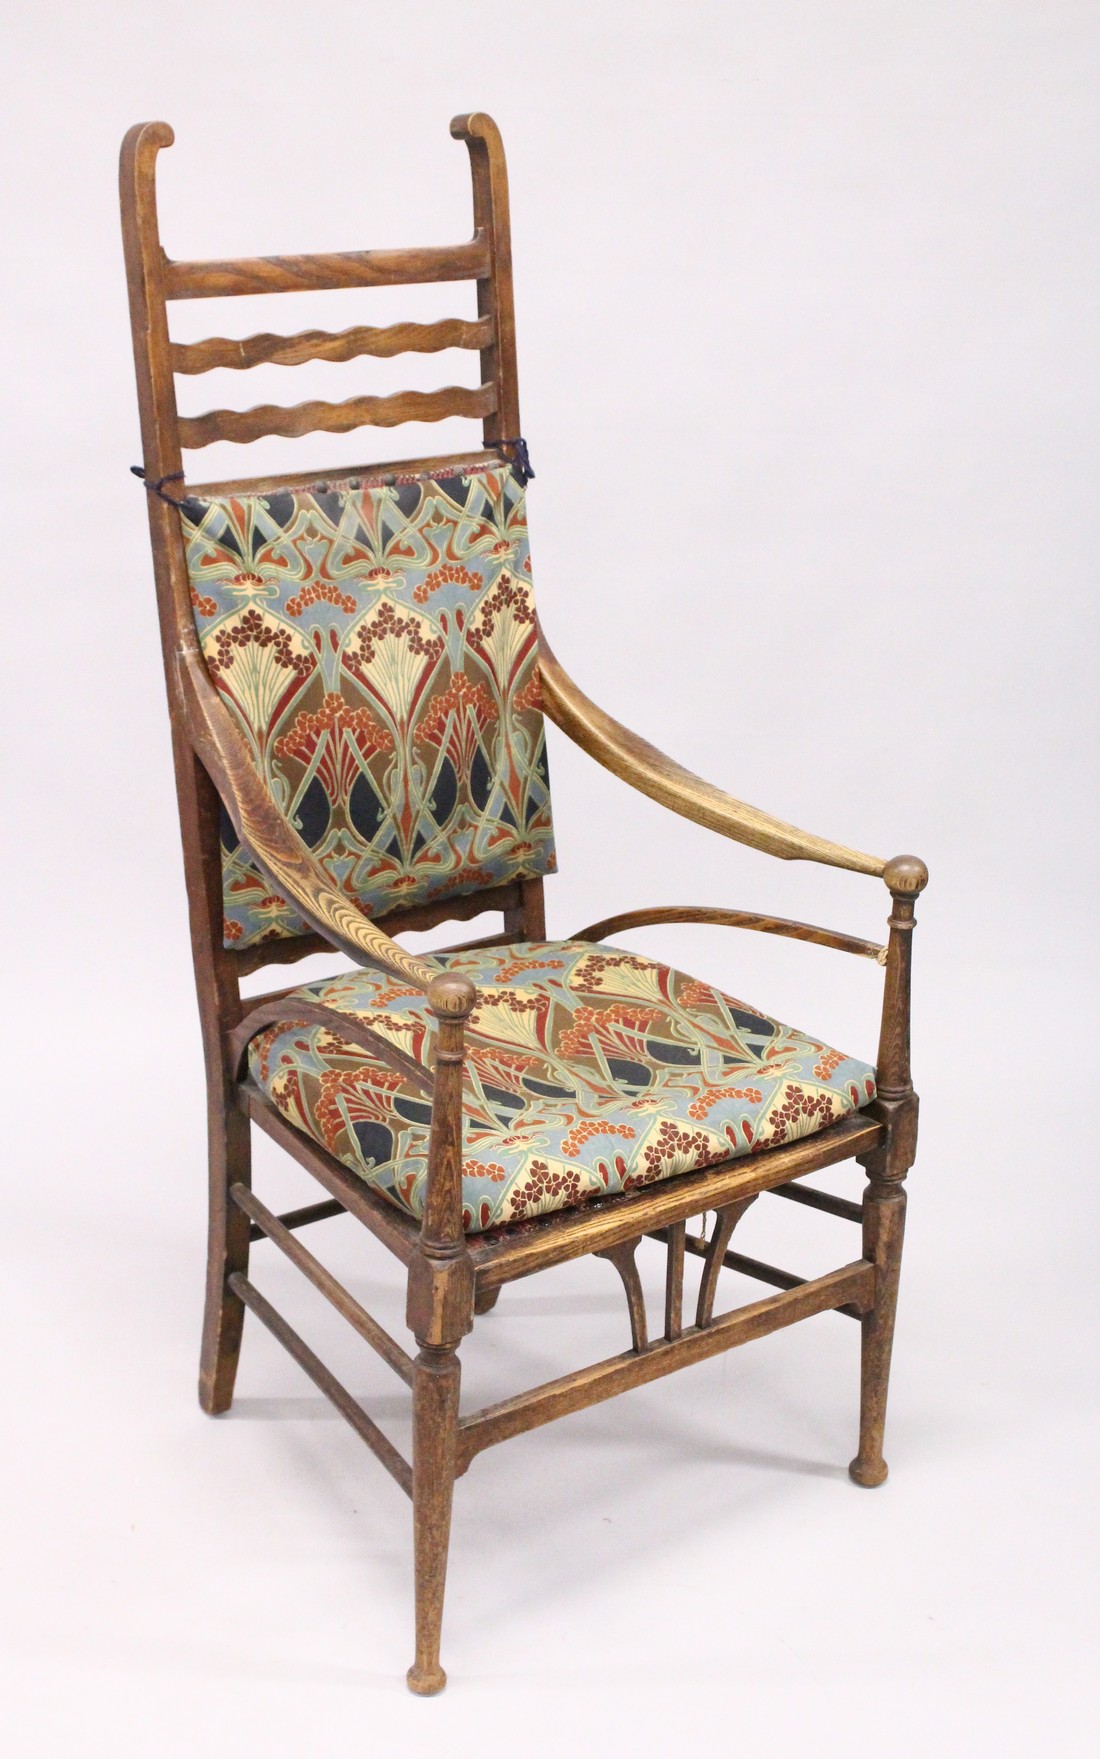 A GOOD LIBERTY RUSTIC ARM CHAIR with Liberty print padded back and seat.